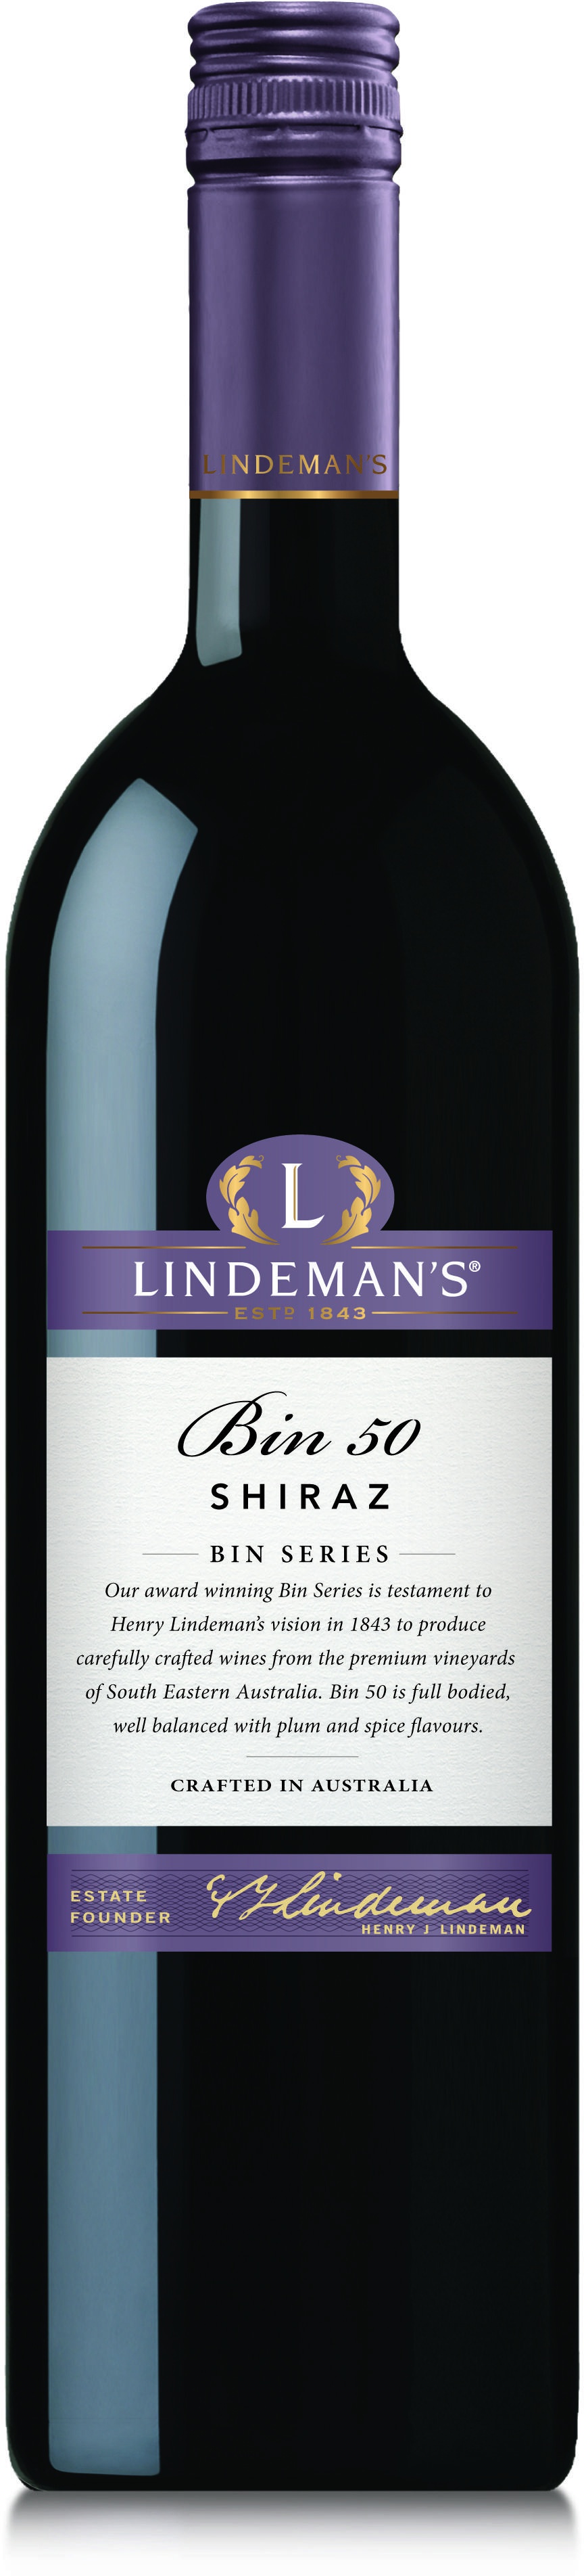 Wine critic Matthew Jukes said of Lindeman’s Bin 50 Shiraz, that “it’s a lesson to the world in winemaking”